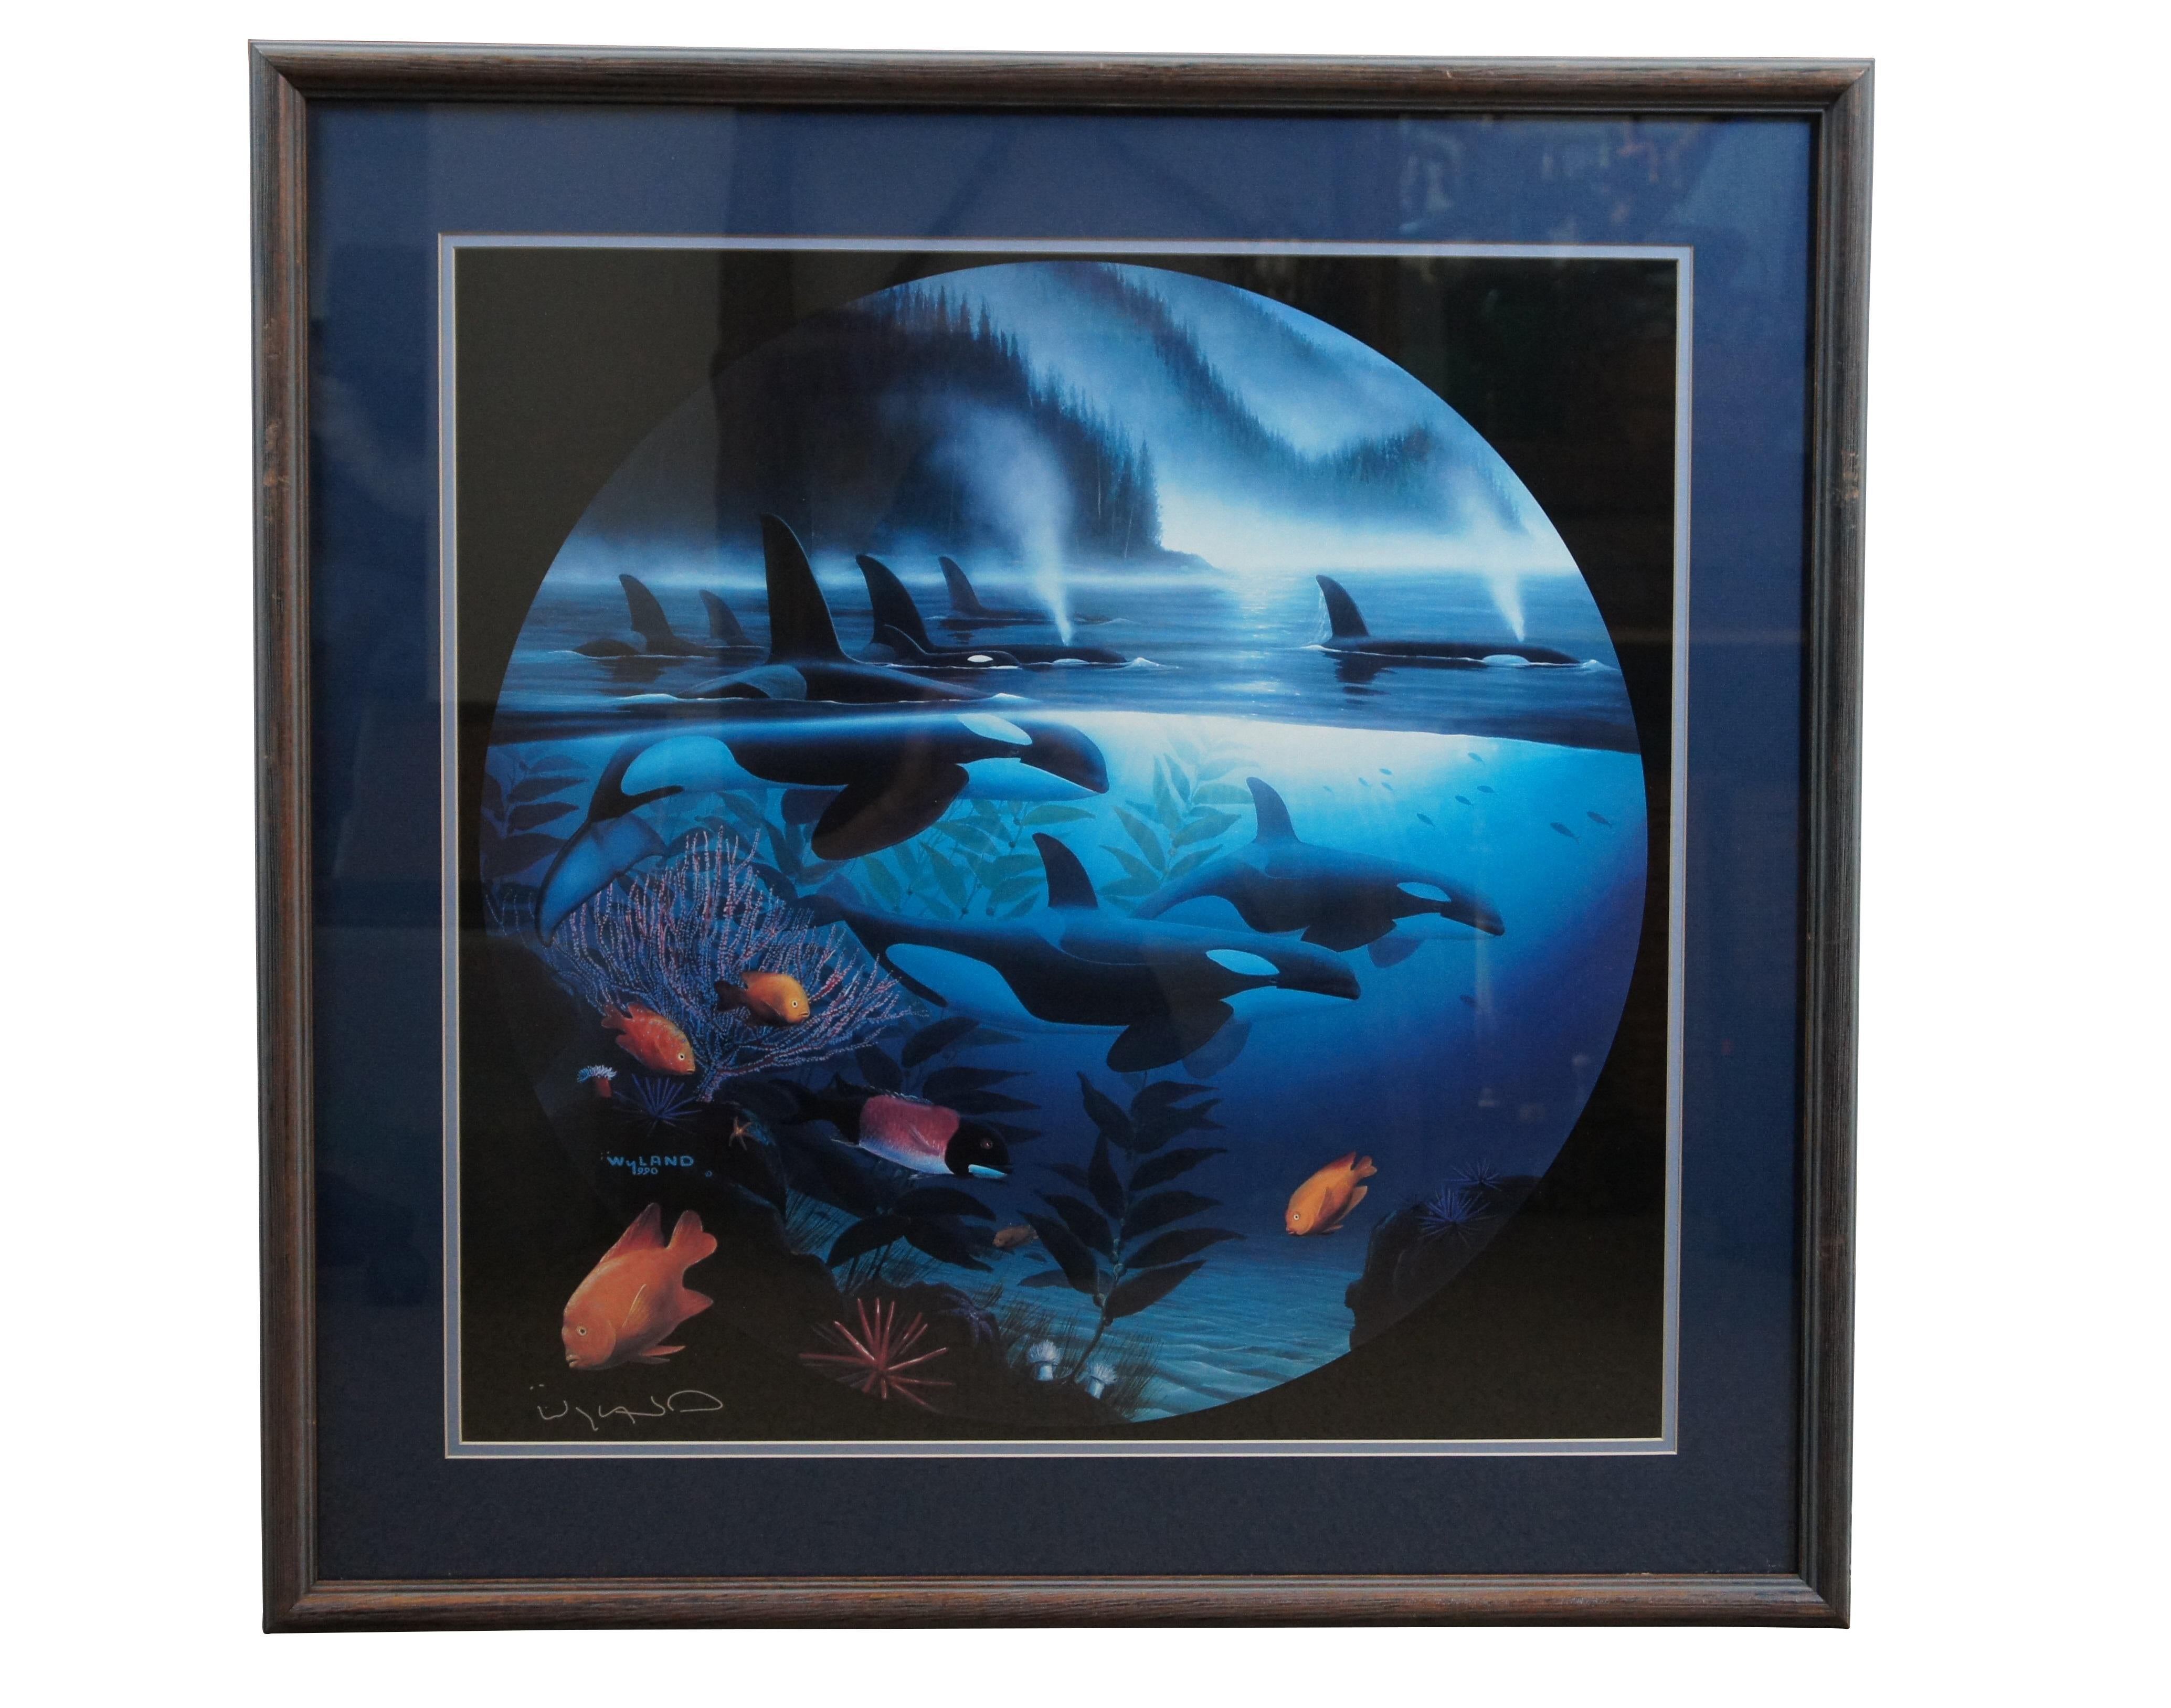 Pair of early 1990's lithograph prints by Robert Wyland - Orca Journey and Sea Otters. Both signed in metallic pen. Framed in factory distressed wood frames with blue matt under glass.

